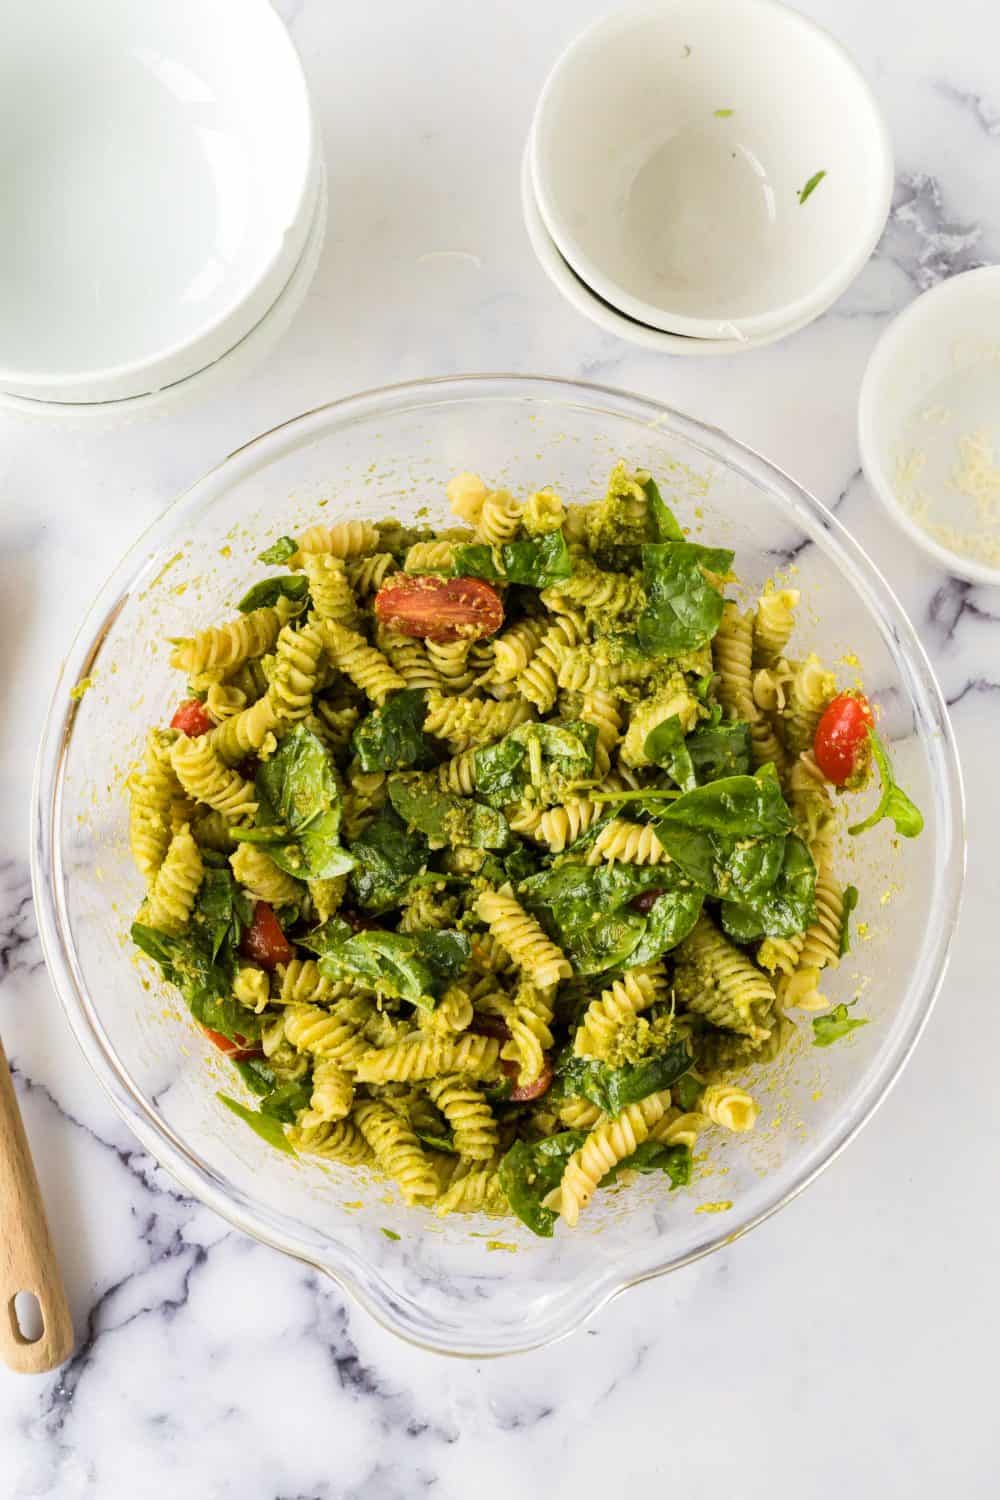 top view of a clear mixing bowl with pesto pasta salad